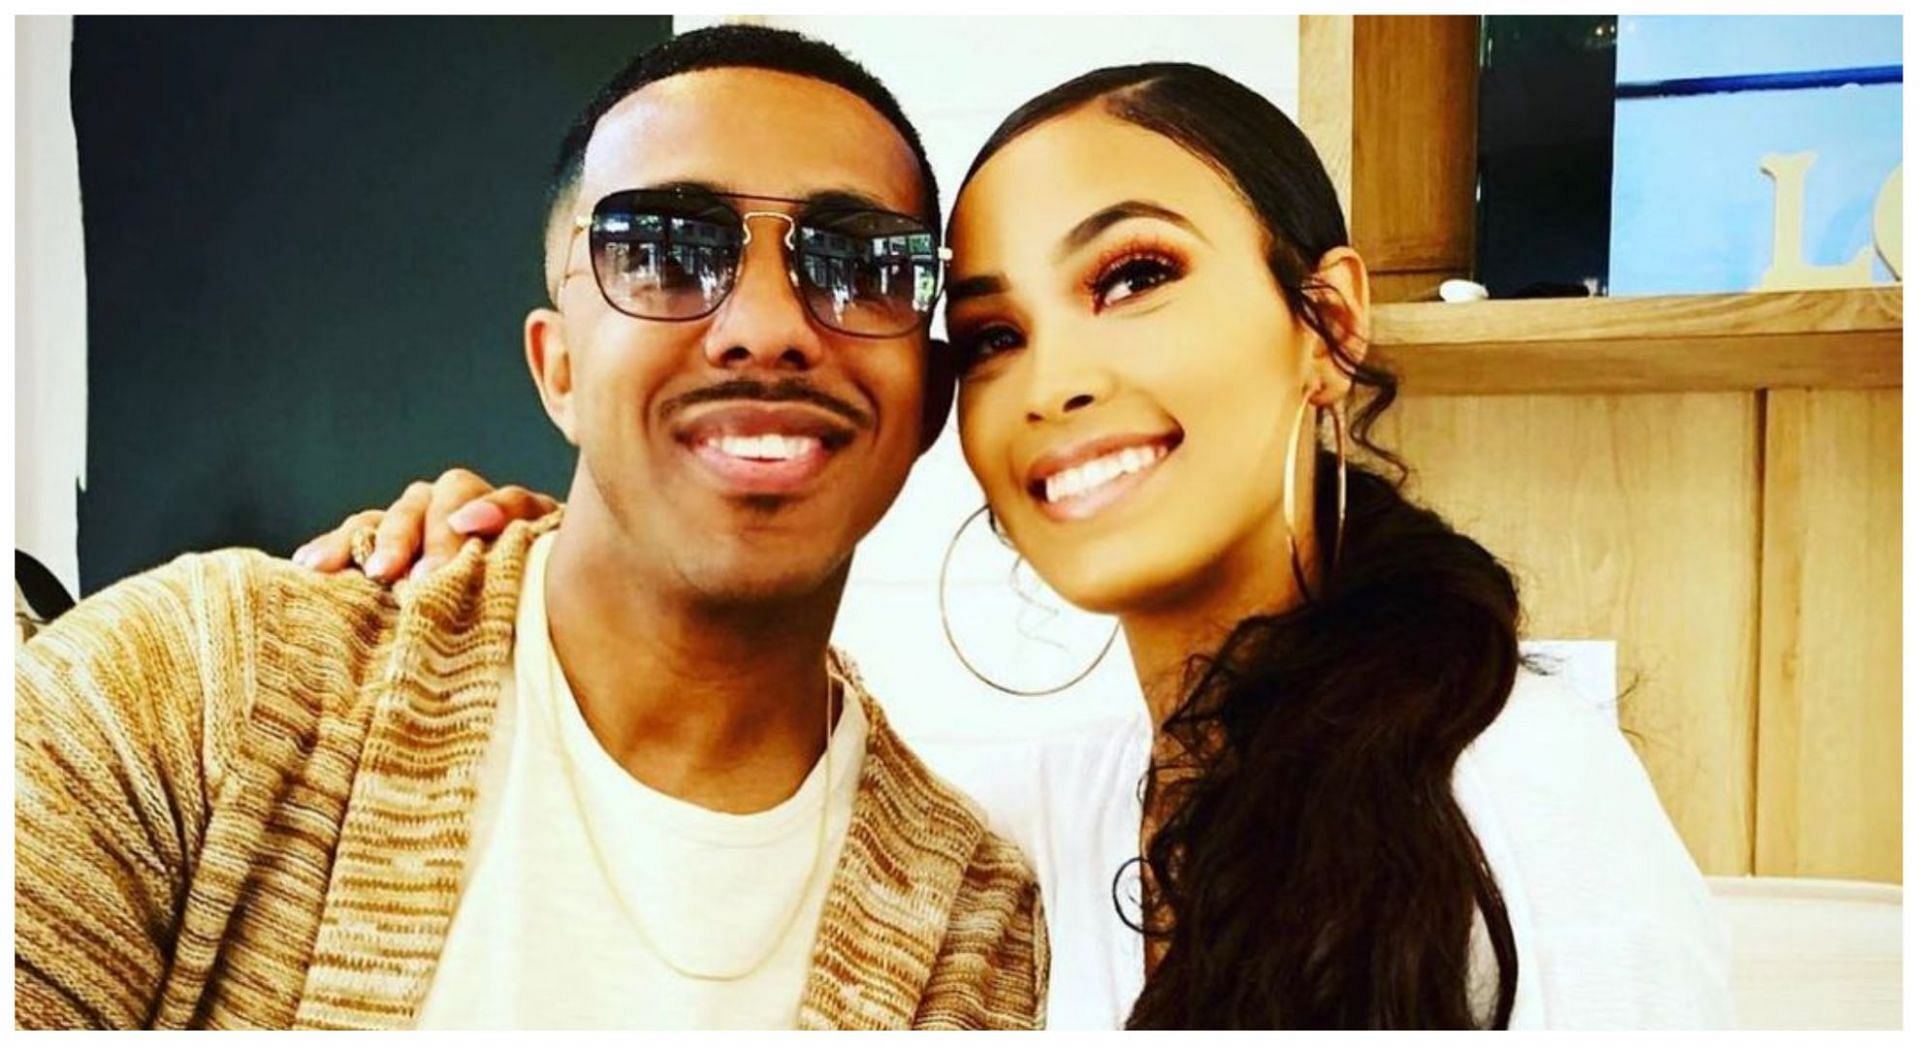 Marques Houston and Miya Dickey&#039;s age gap came under scrutiny once again (Image via Marques Houston/Instagram)